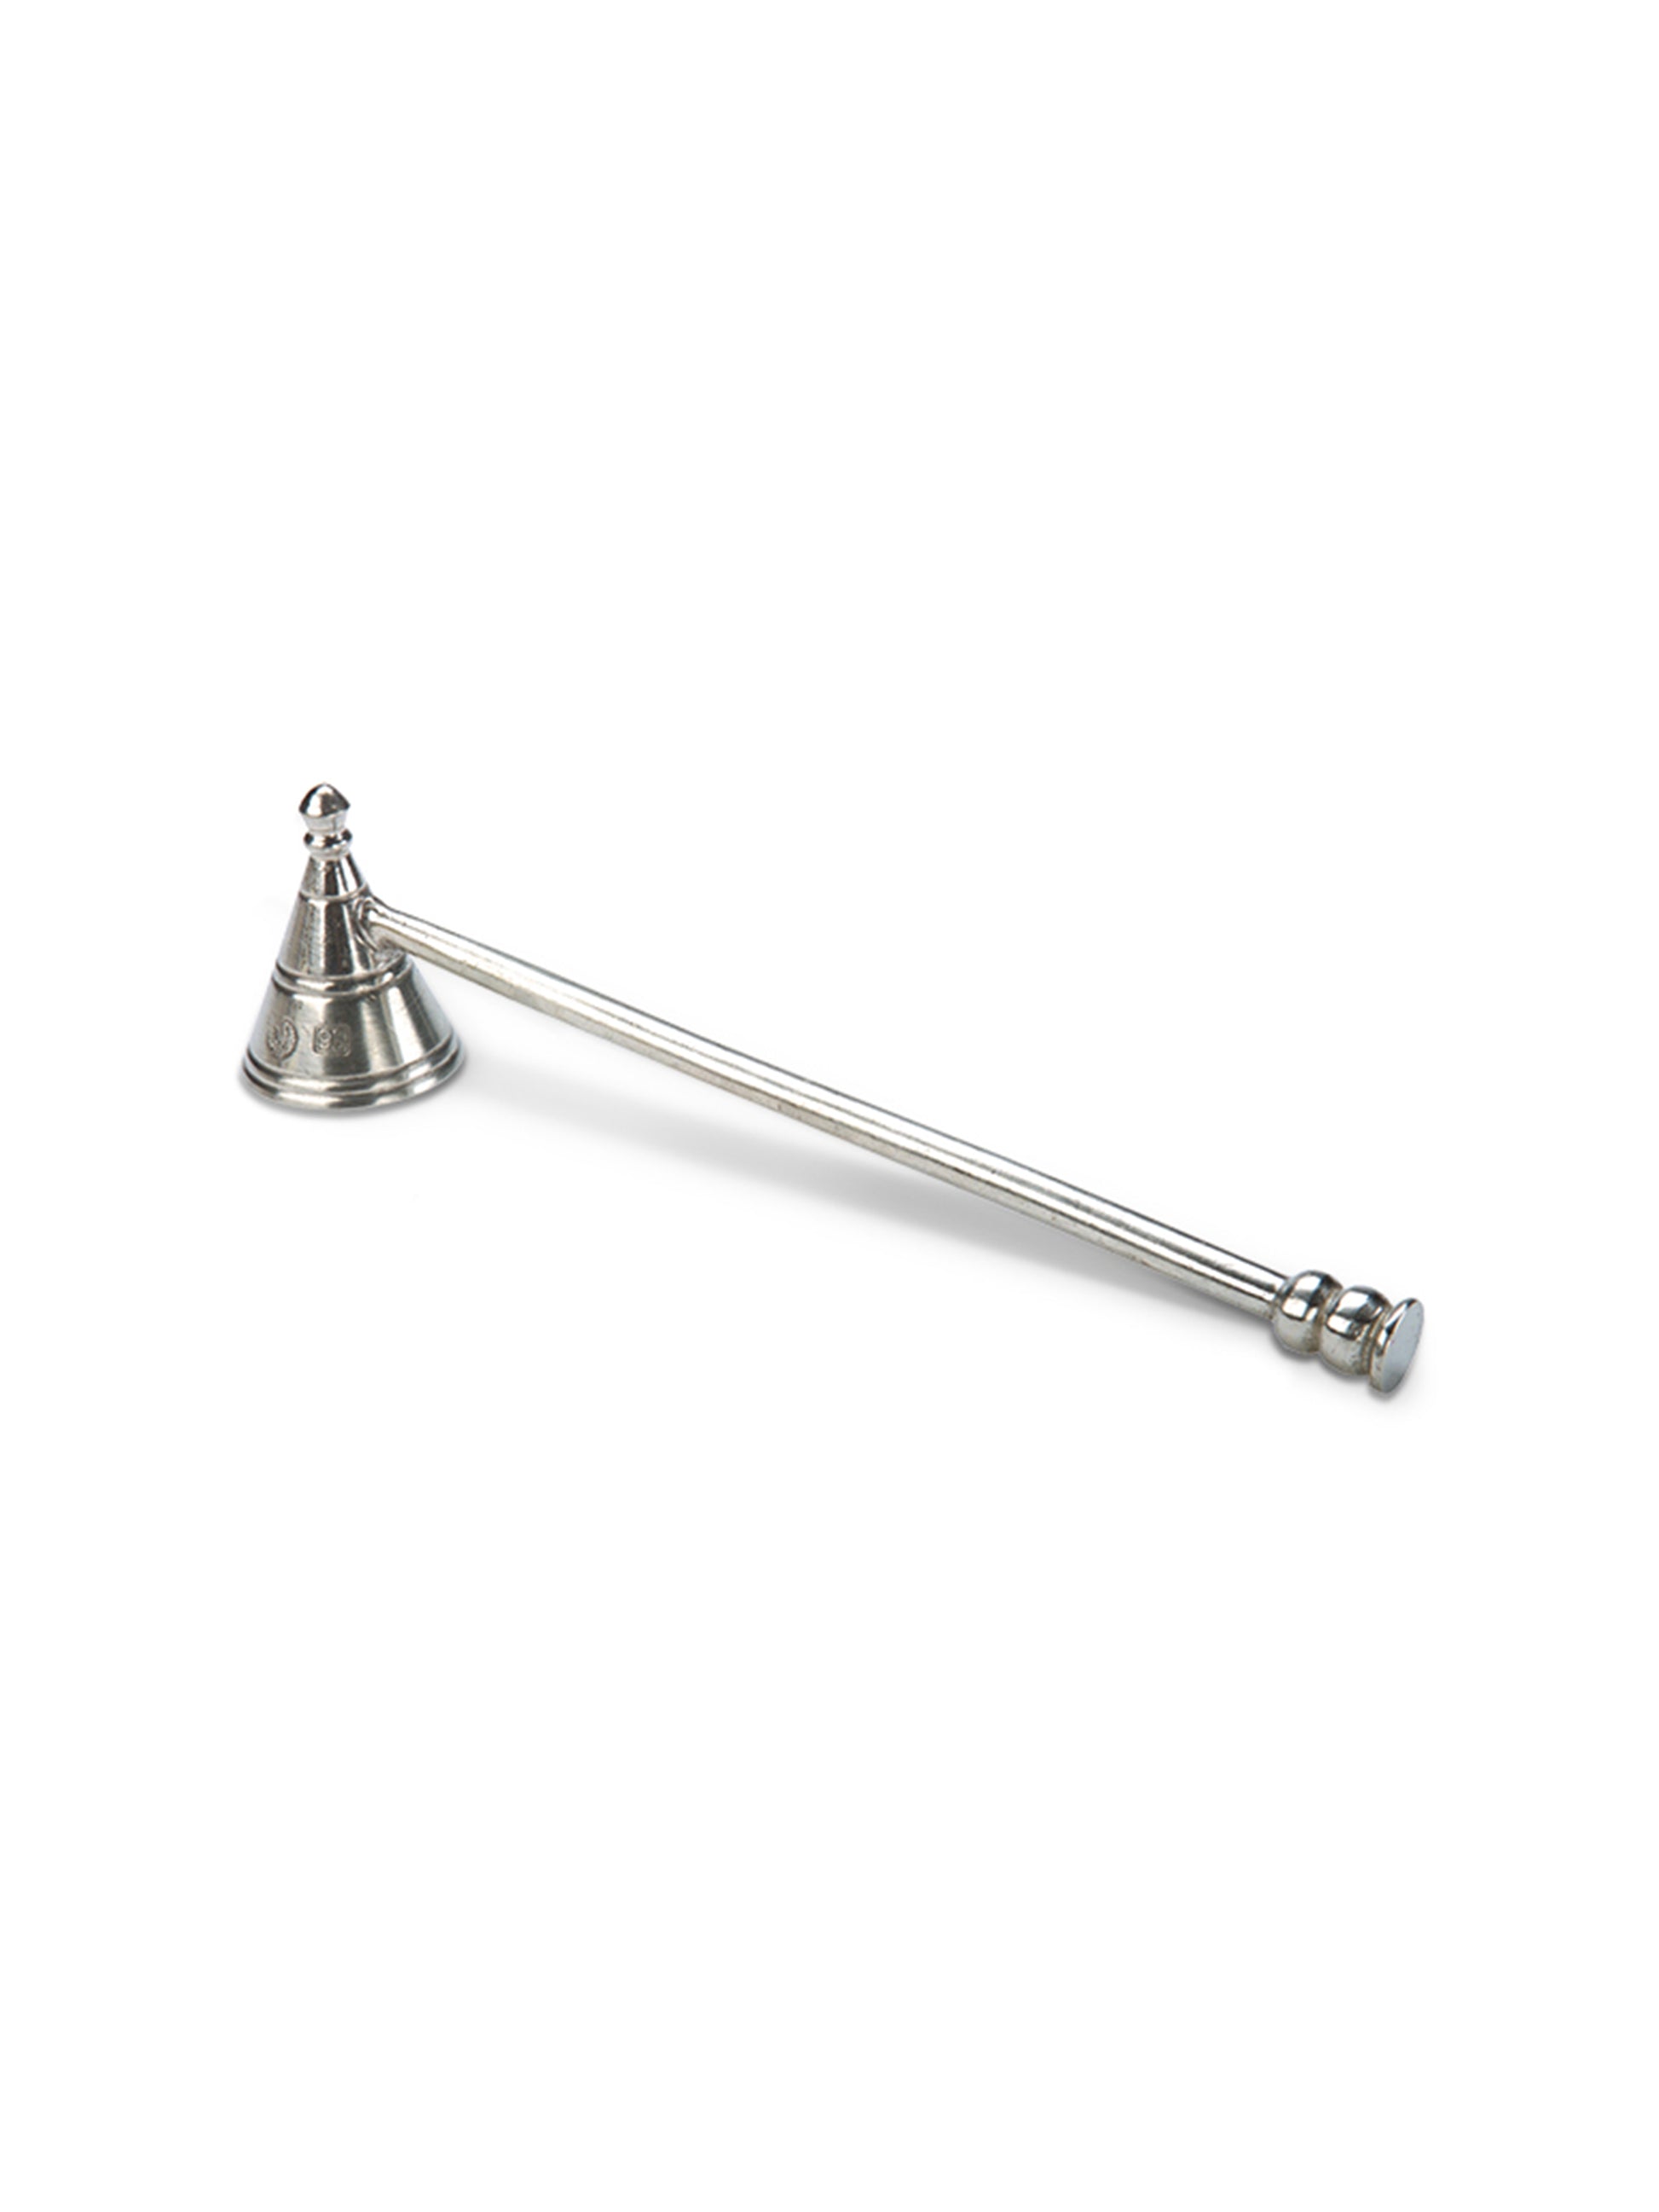 MATCH Pewter Candle Snuffer Weston Table